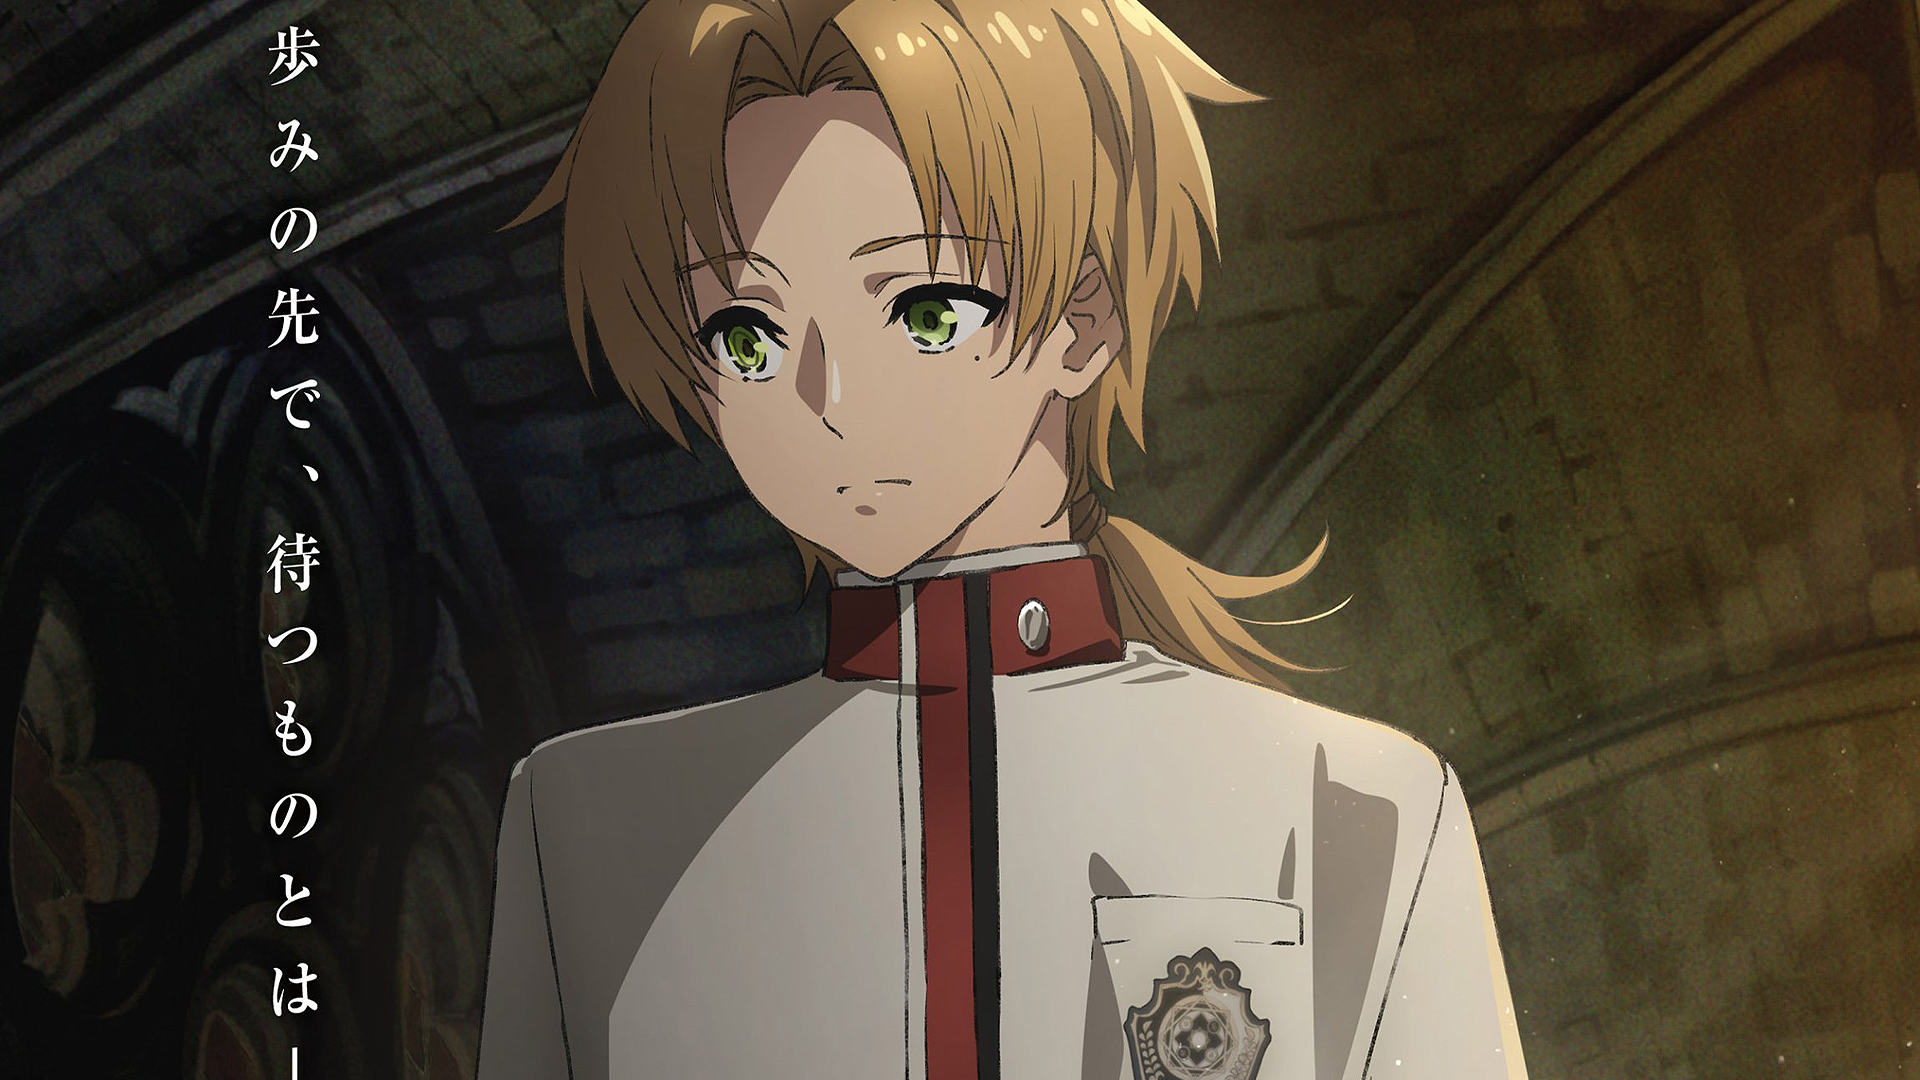 Mushoku Tensei Anime's Return Delayed from July to October